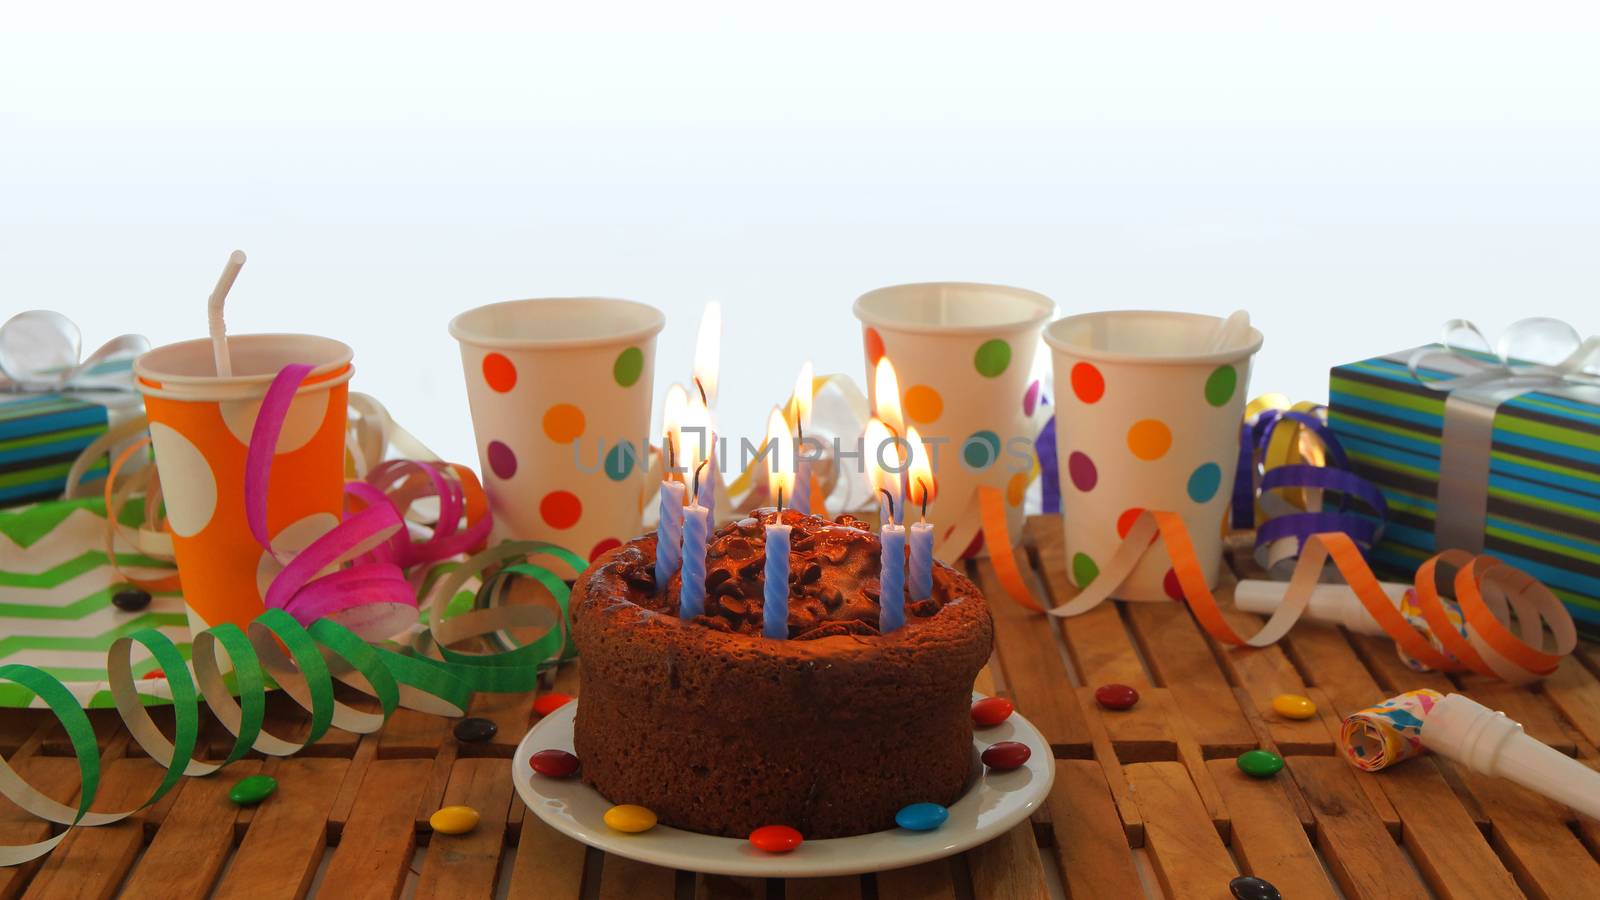 Chocolate birthday cake with a blue candles burning on rustic wooden table with background of colorful streamers, gifts, plastic cups with candies and white wall in the background